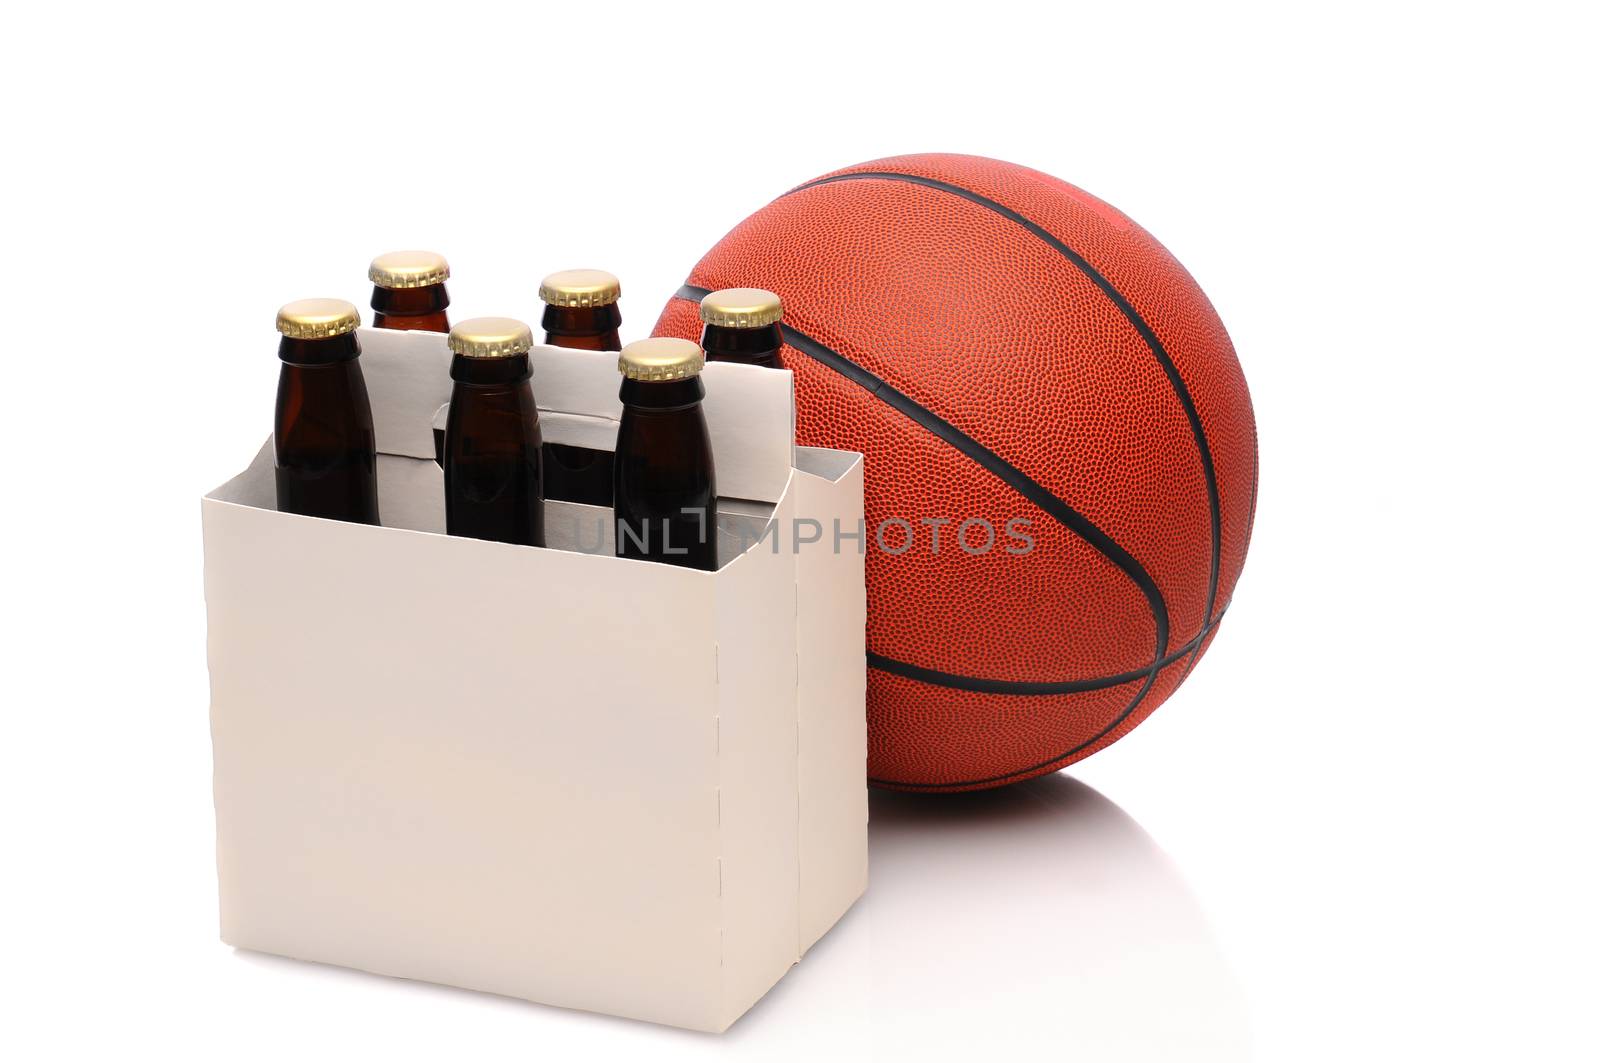 Six pack of  beer bottles with a basketball on a white background.